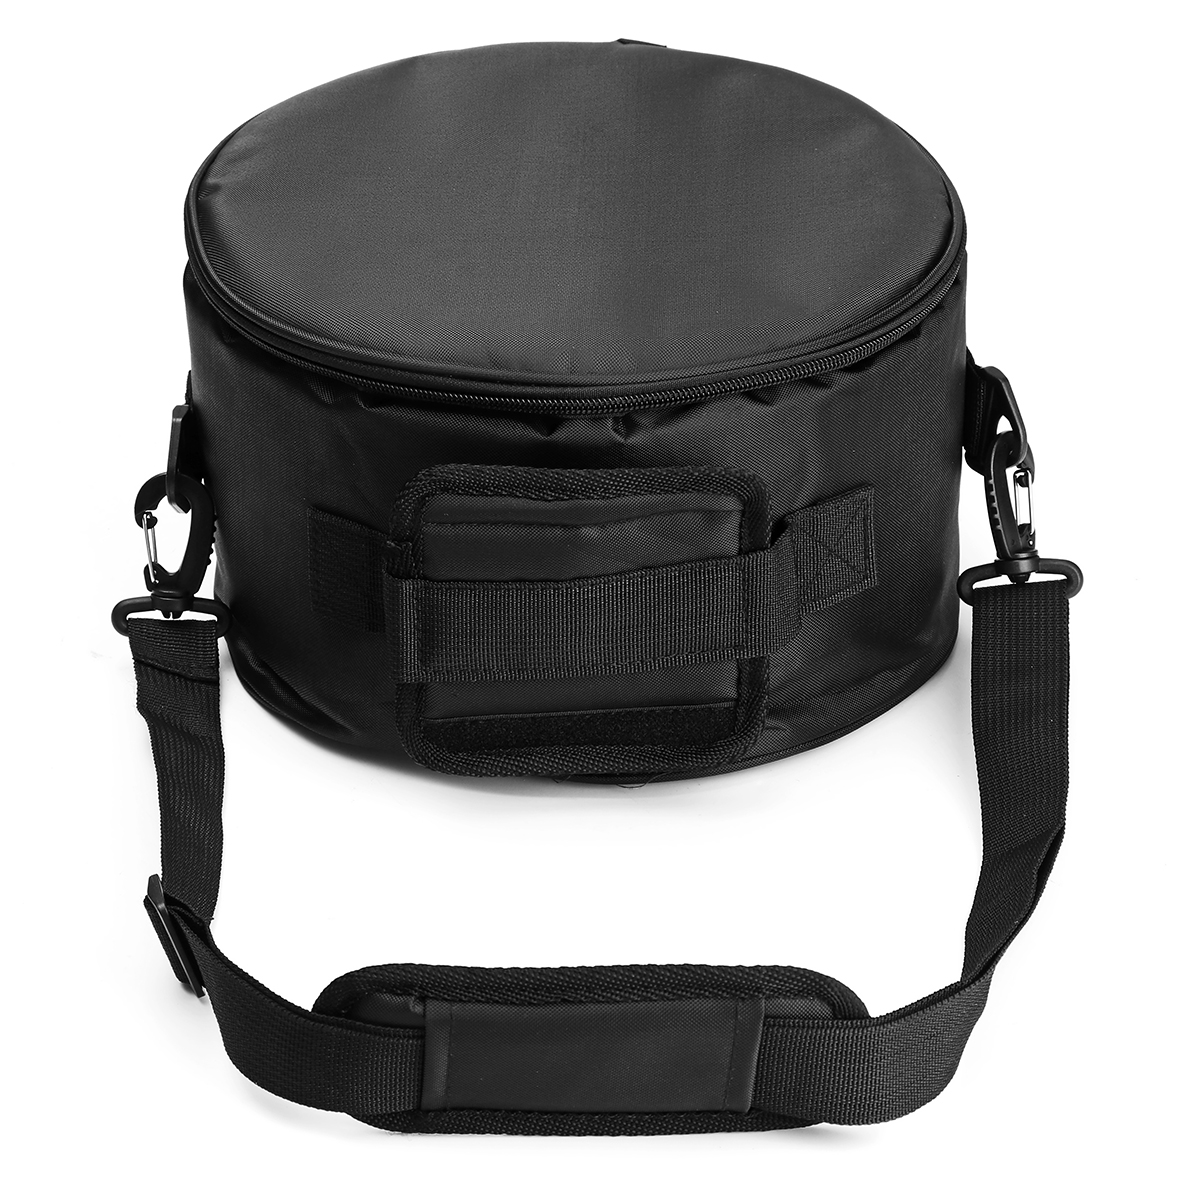 Steel-Tongue-Drum-Bag-Storage-Punch-Soulder-Crossbody-Bag-For-Outdoor-Camping-Leisure-Wear-1357124-5